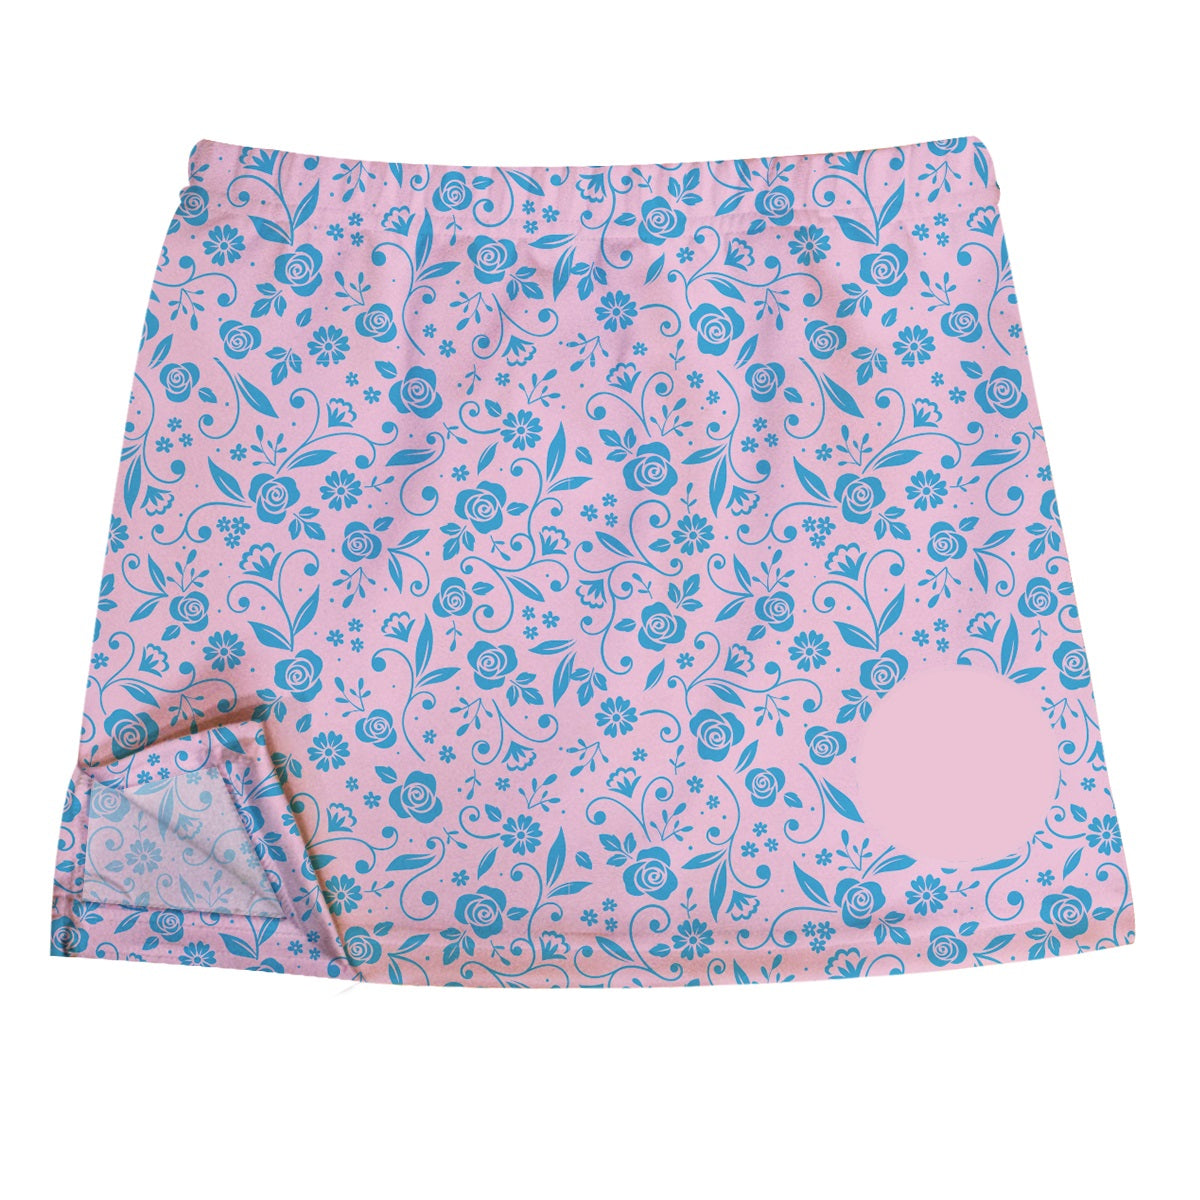 Flowers Print Monogram Pink Skirt With Side Vents - Wimziy&Co.